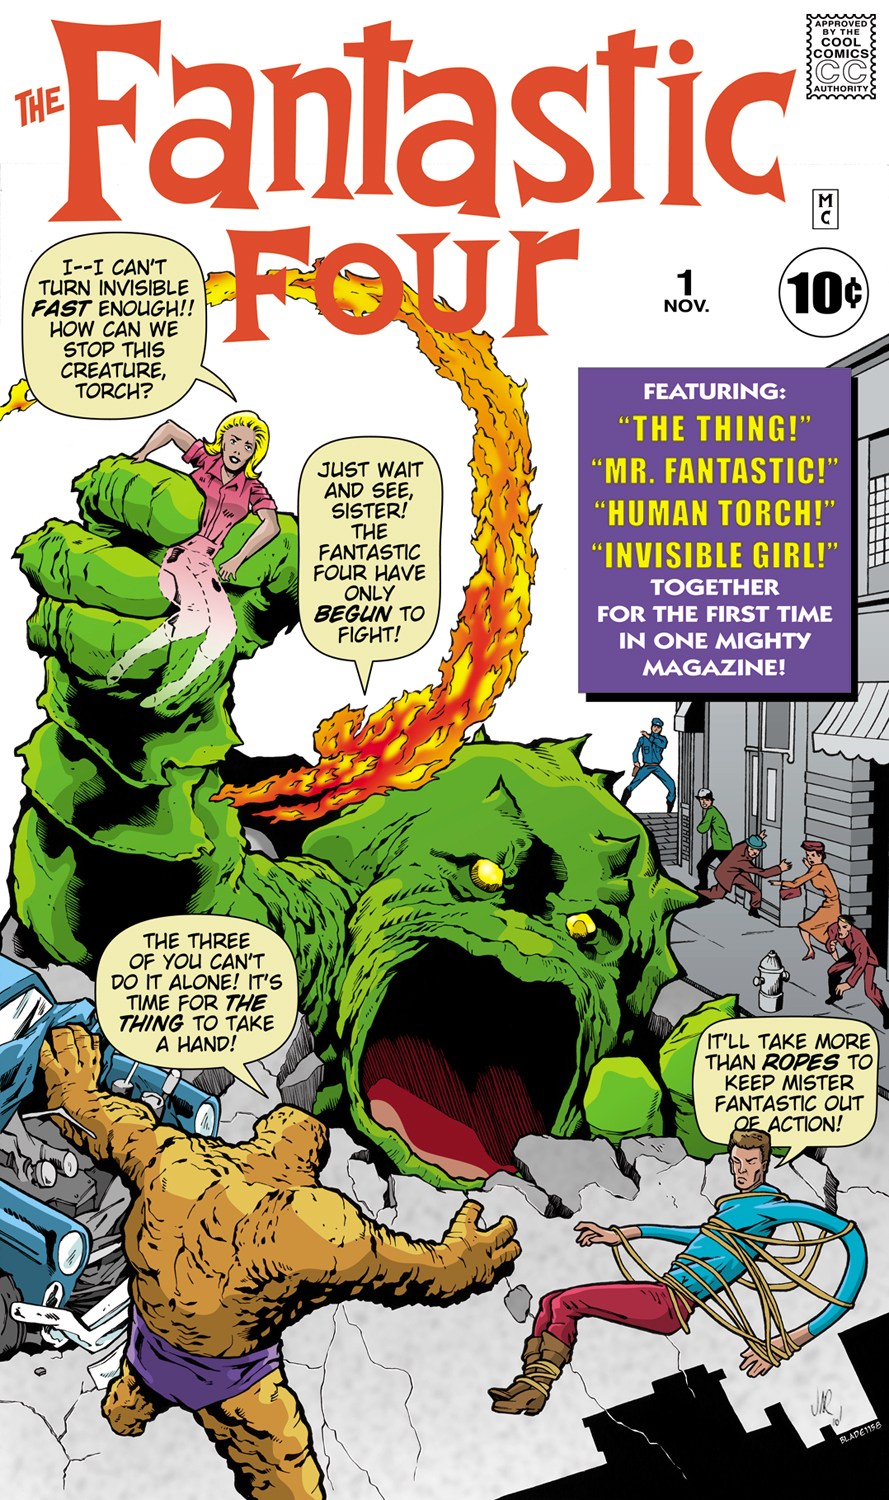 kevin-feige-teases-fantastic-four-cosmic-book-news